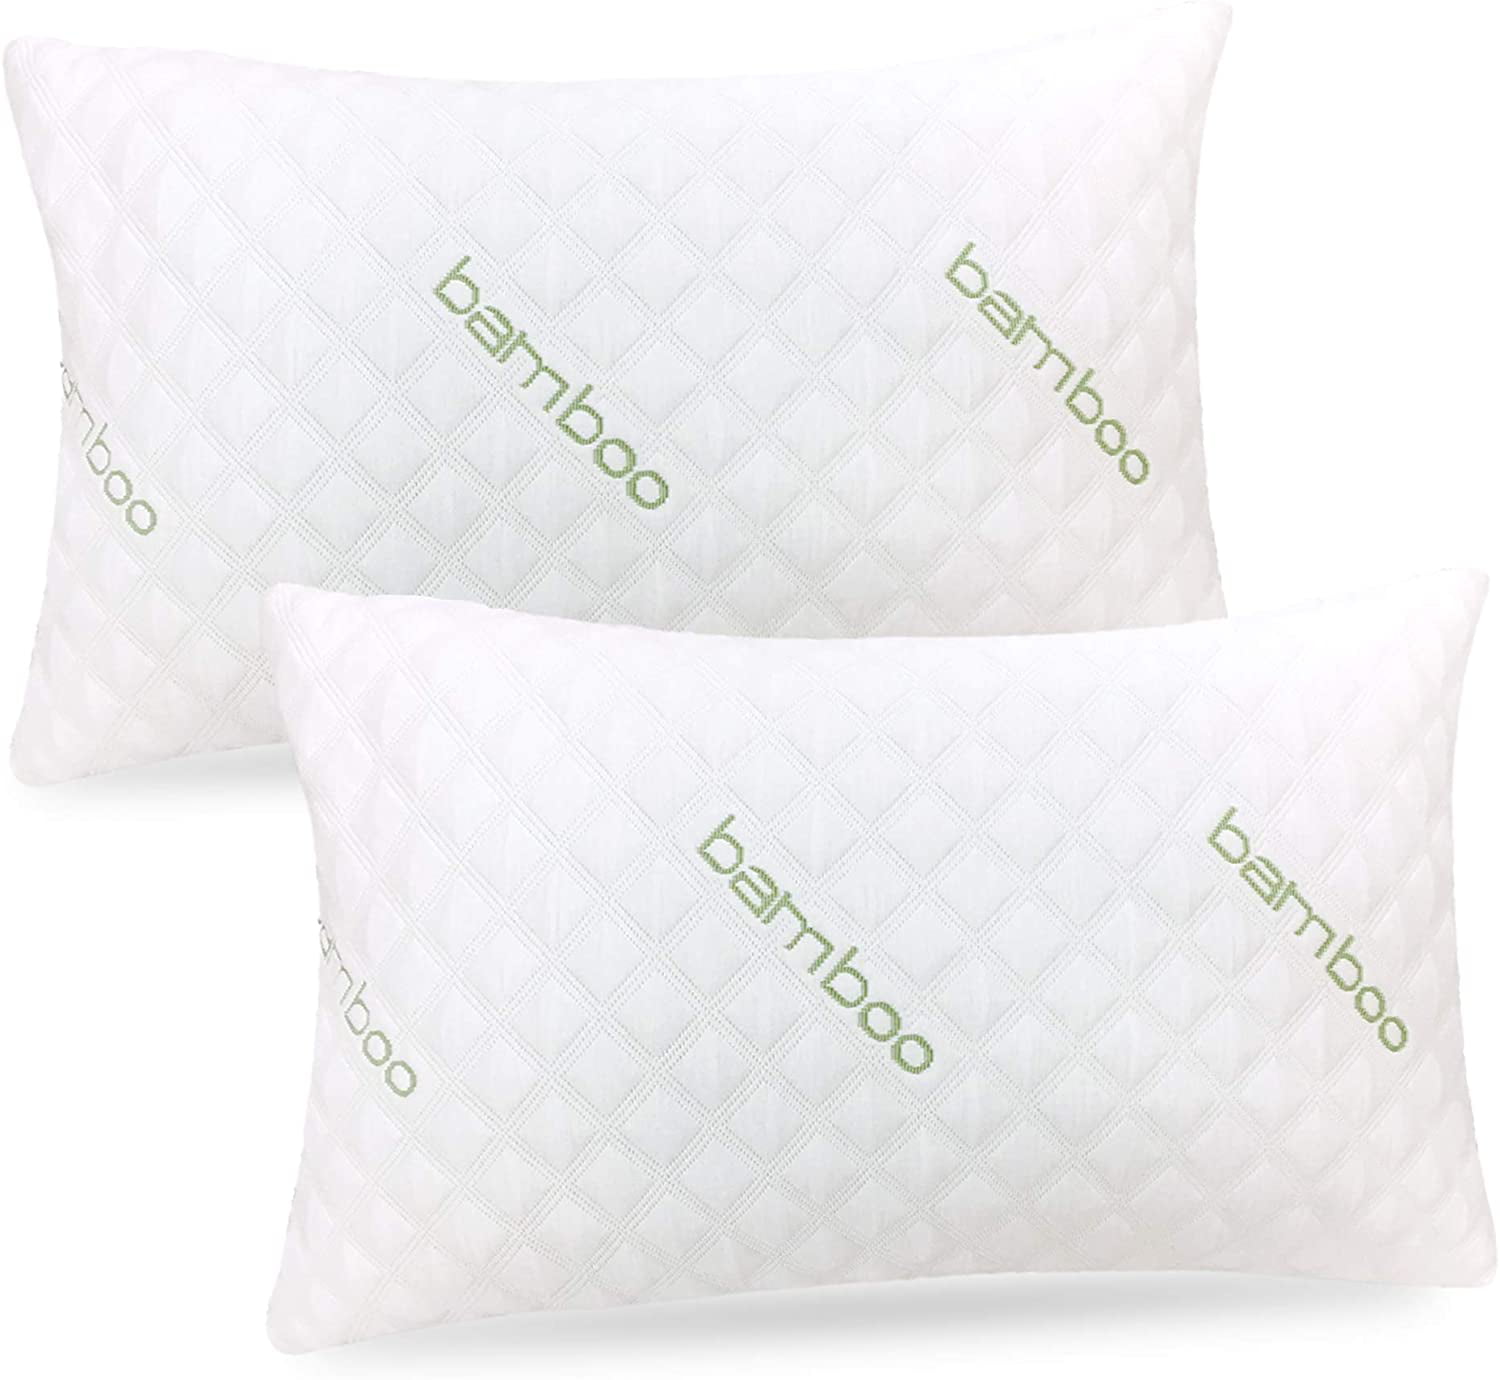 Details about   1/2 Pcs Hypoallergenic Bamboo Memory Foam Bed Pillow Queen/King Size w/Carry Bag 